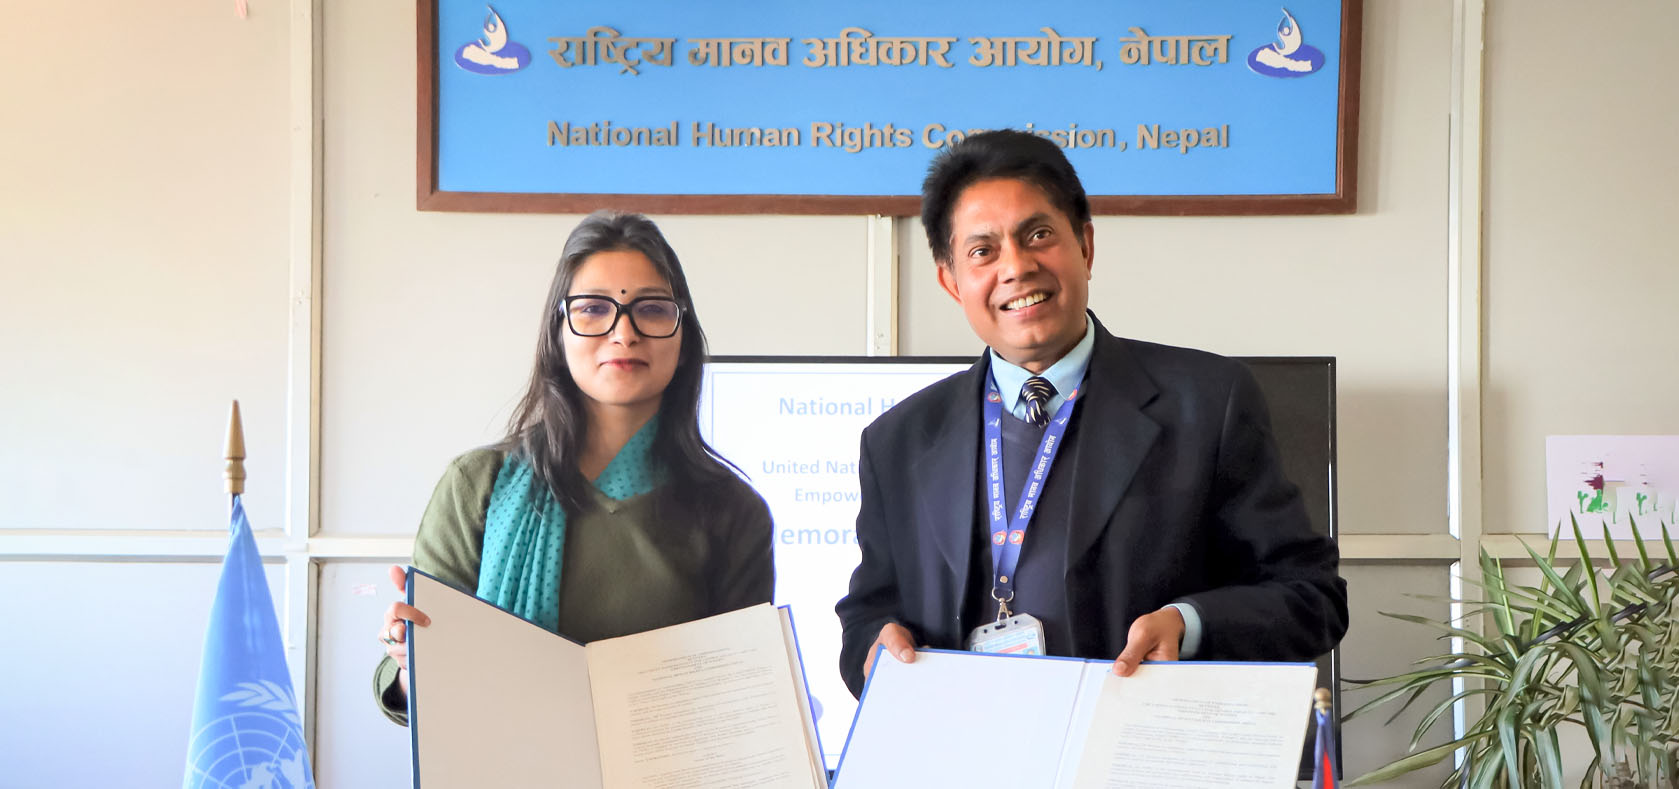 Navanita Sinha, Head of Office a.i., (left) and Murari Prasad Khanal, Acting Secretary, National Human Rights Commission Nepal (right) sign the MoU on Strengthening Collaboration to Advance Gender Equality and Human Rights. Photo: UN Women/Subeksha Poudel